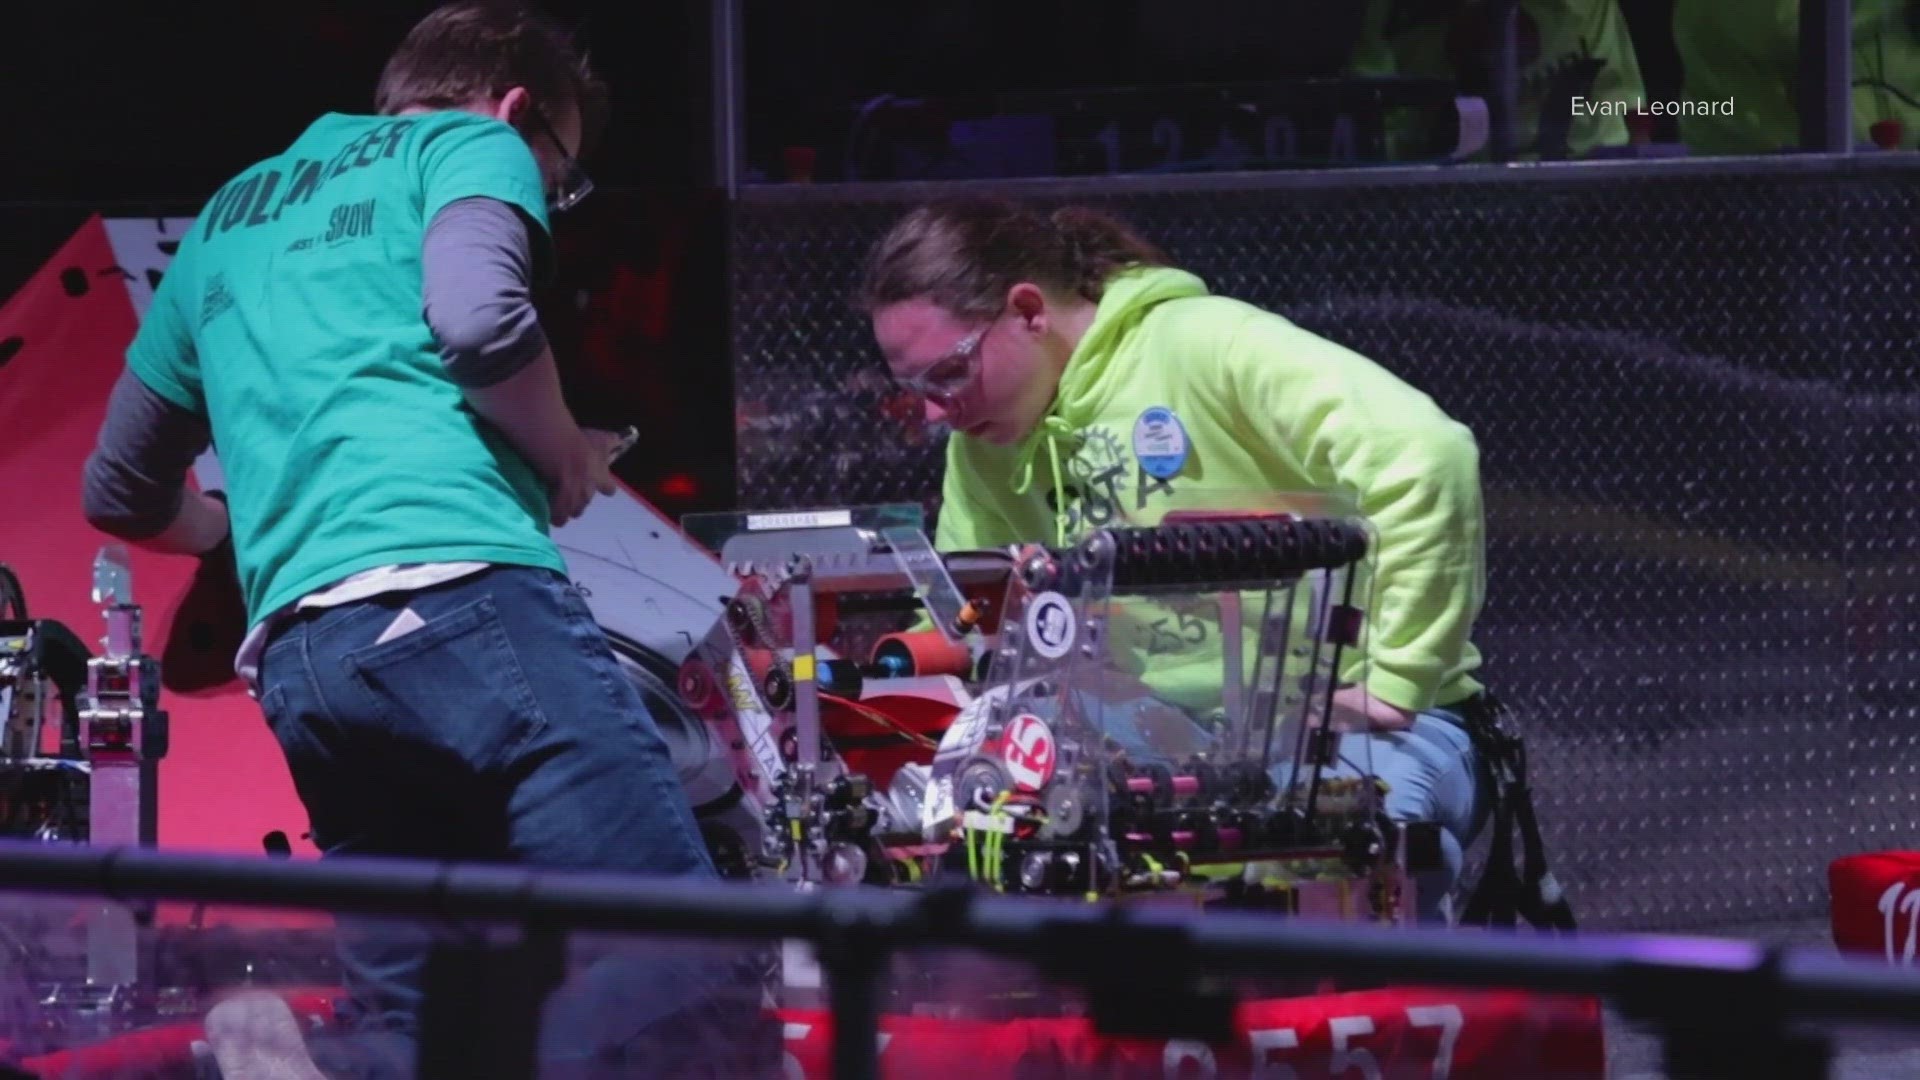 More than 20 robotics teams from across the pacific northwest are competing in the FIRST Robotics Championship, starting Thursday in Houston